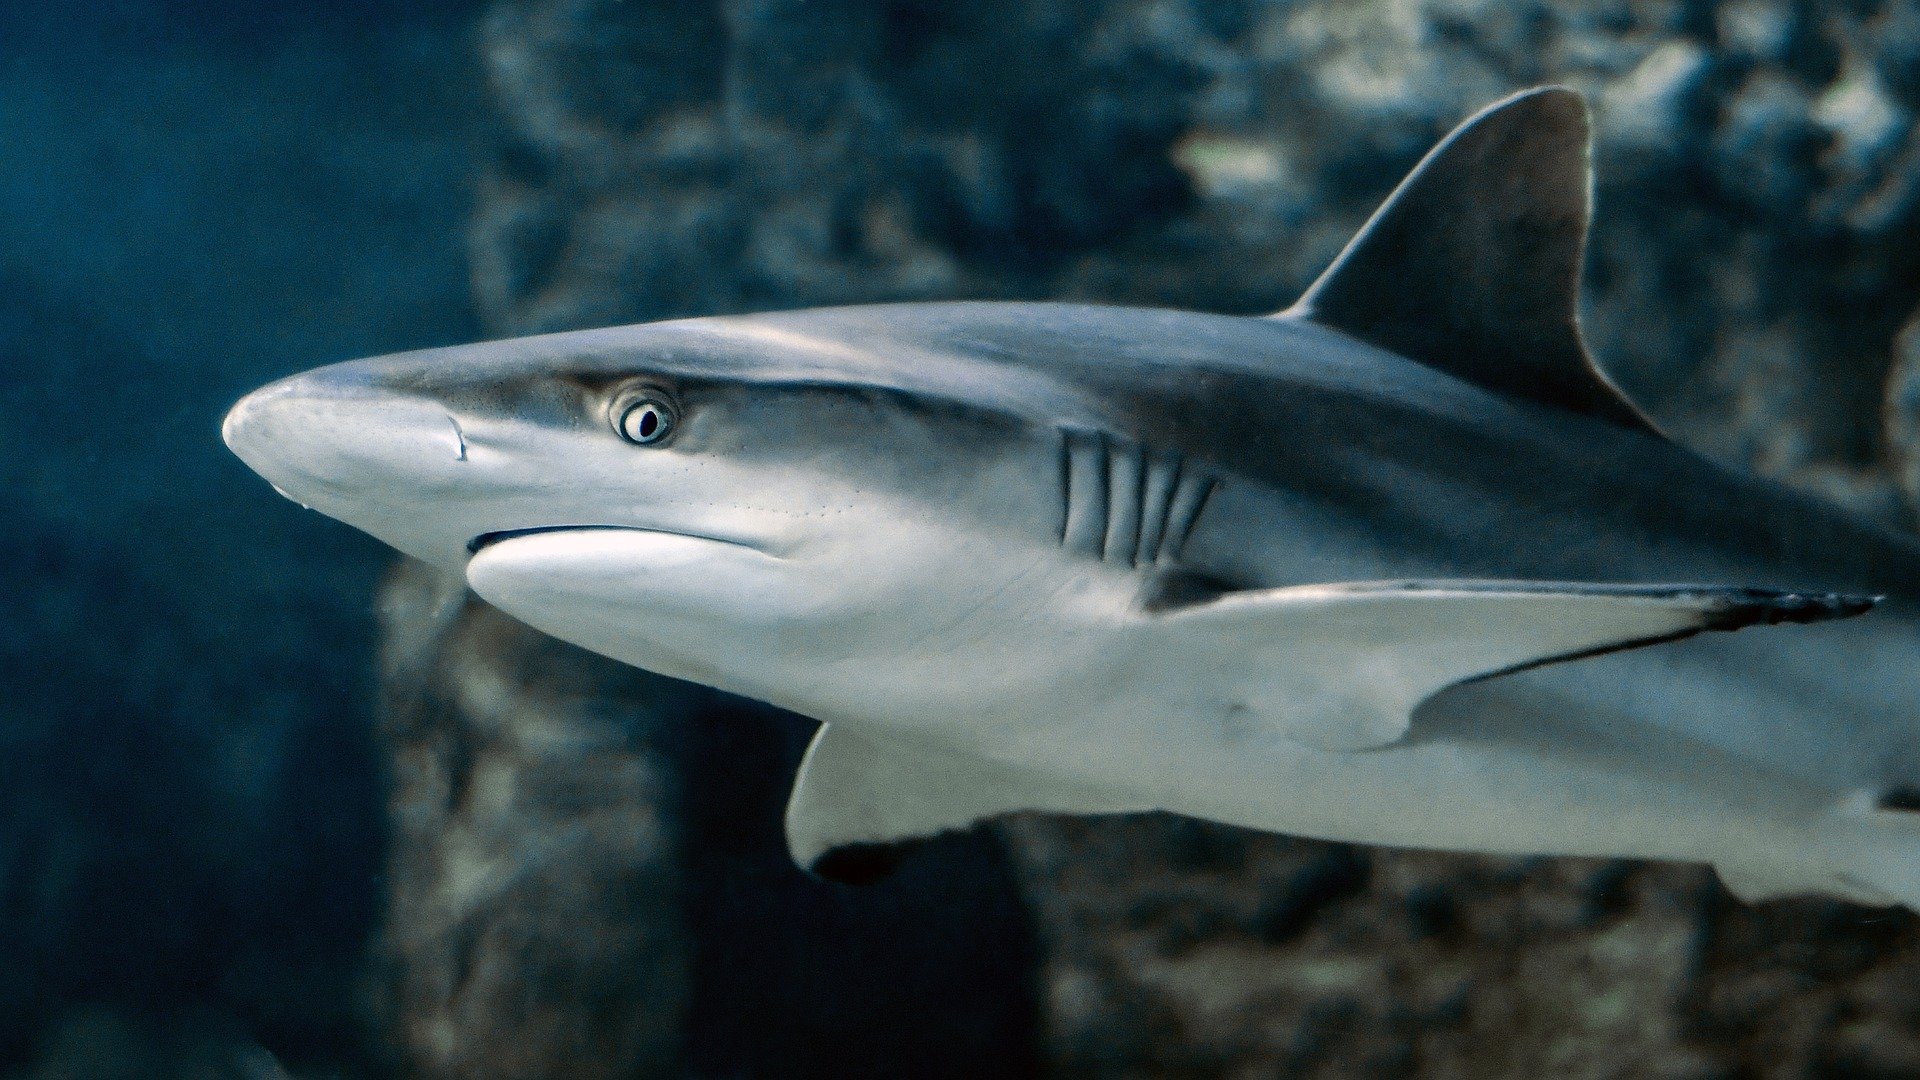 how sensitive is a sharks sense of smell and can a shark smell blood from far away in the water